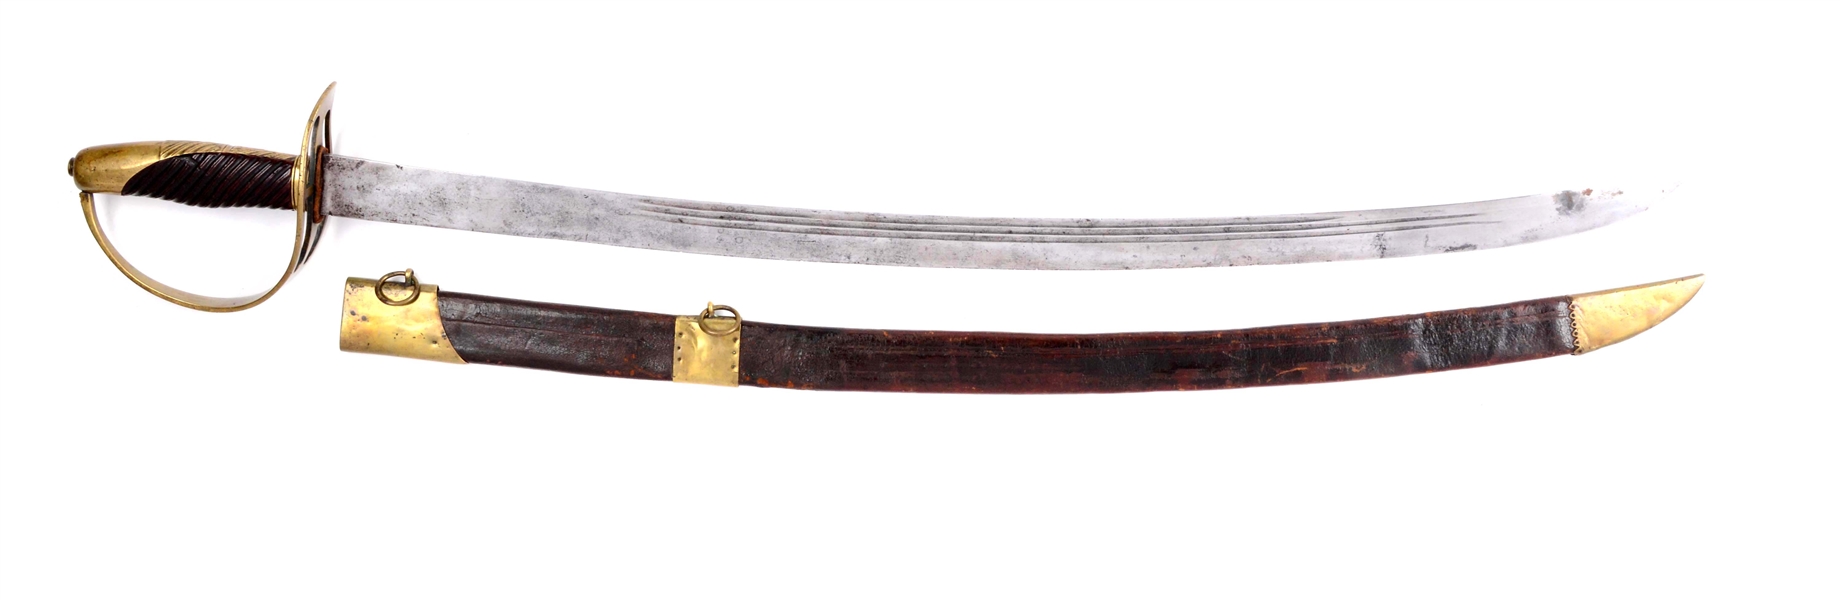 EXTRAORDINARY AMERICAN REVOLUTIONARY WAR PERIOD CAVALRY OFFICERS SABER WITH SCABBARD.